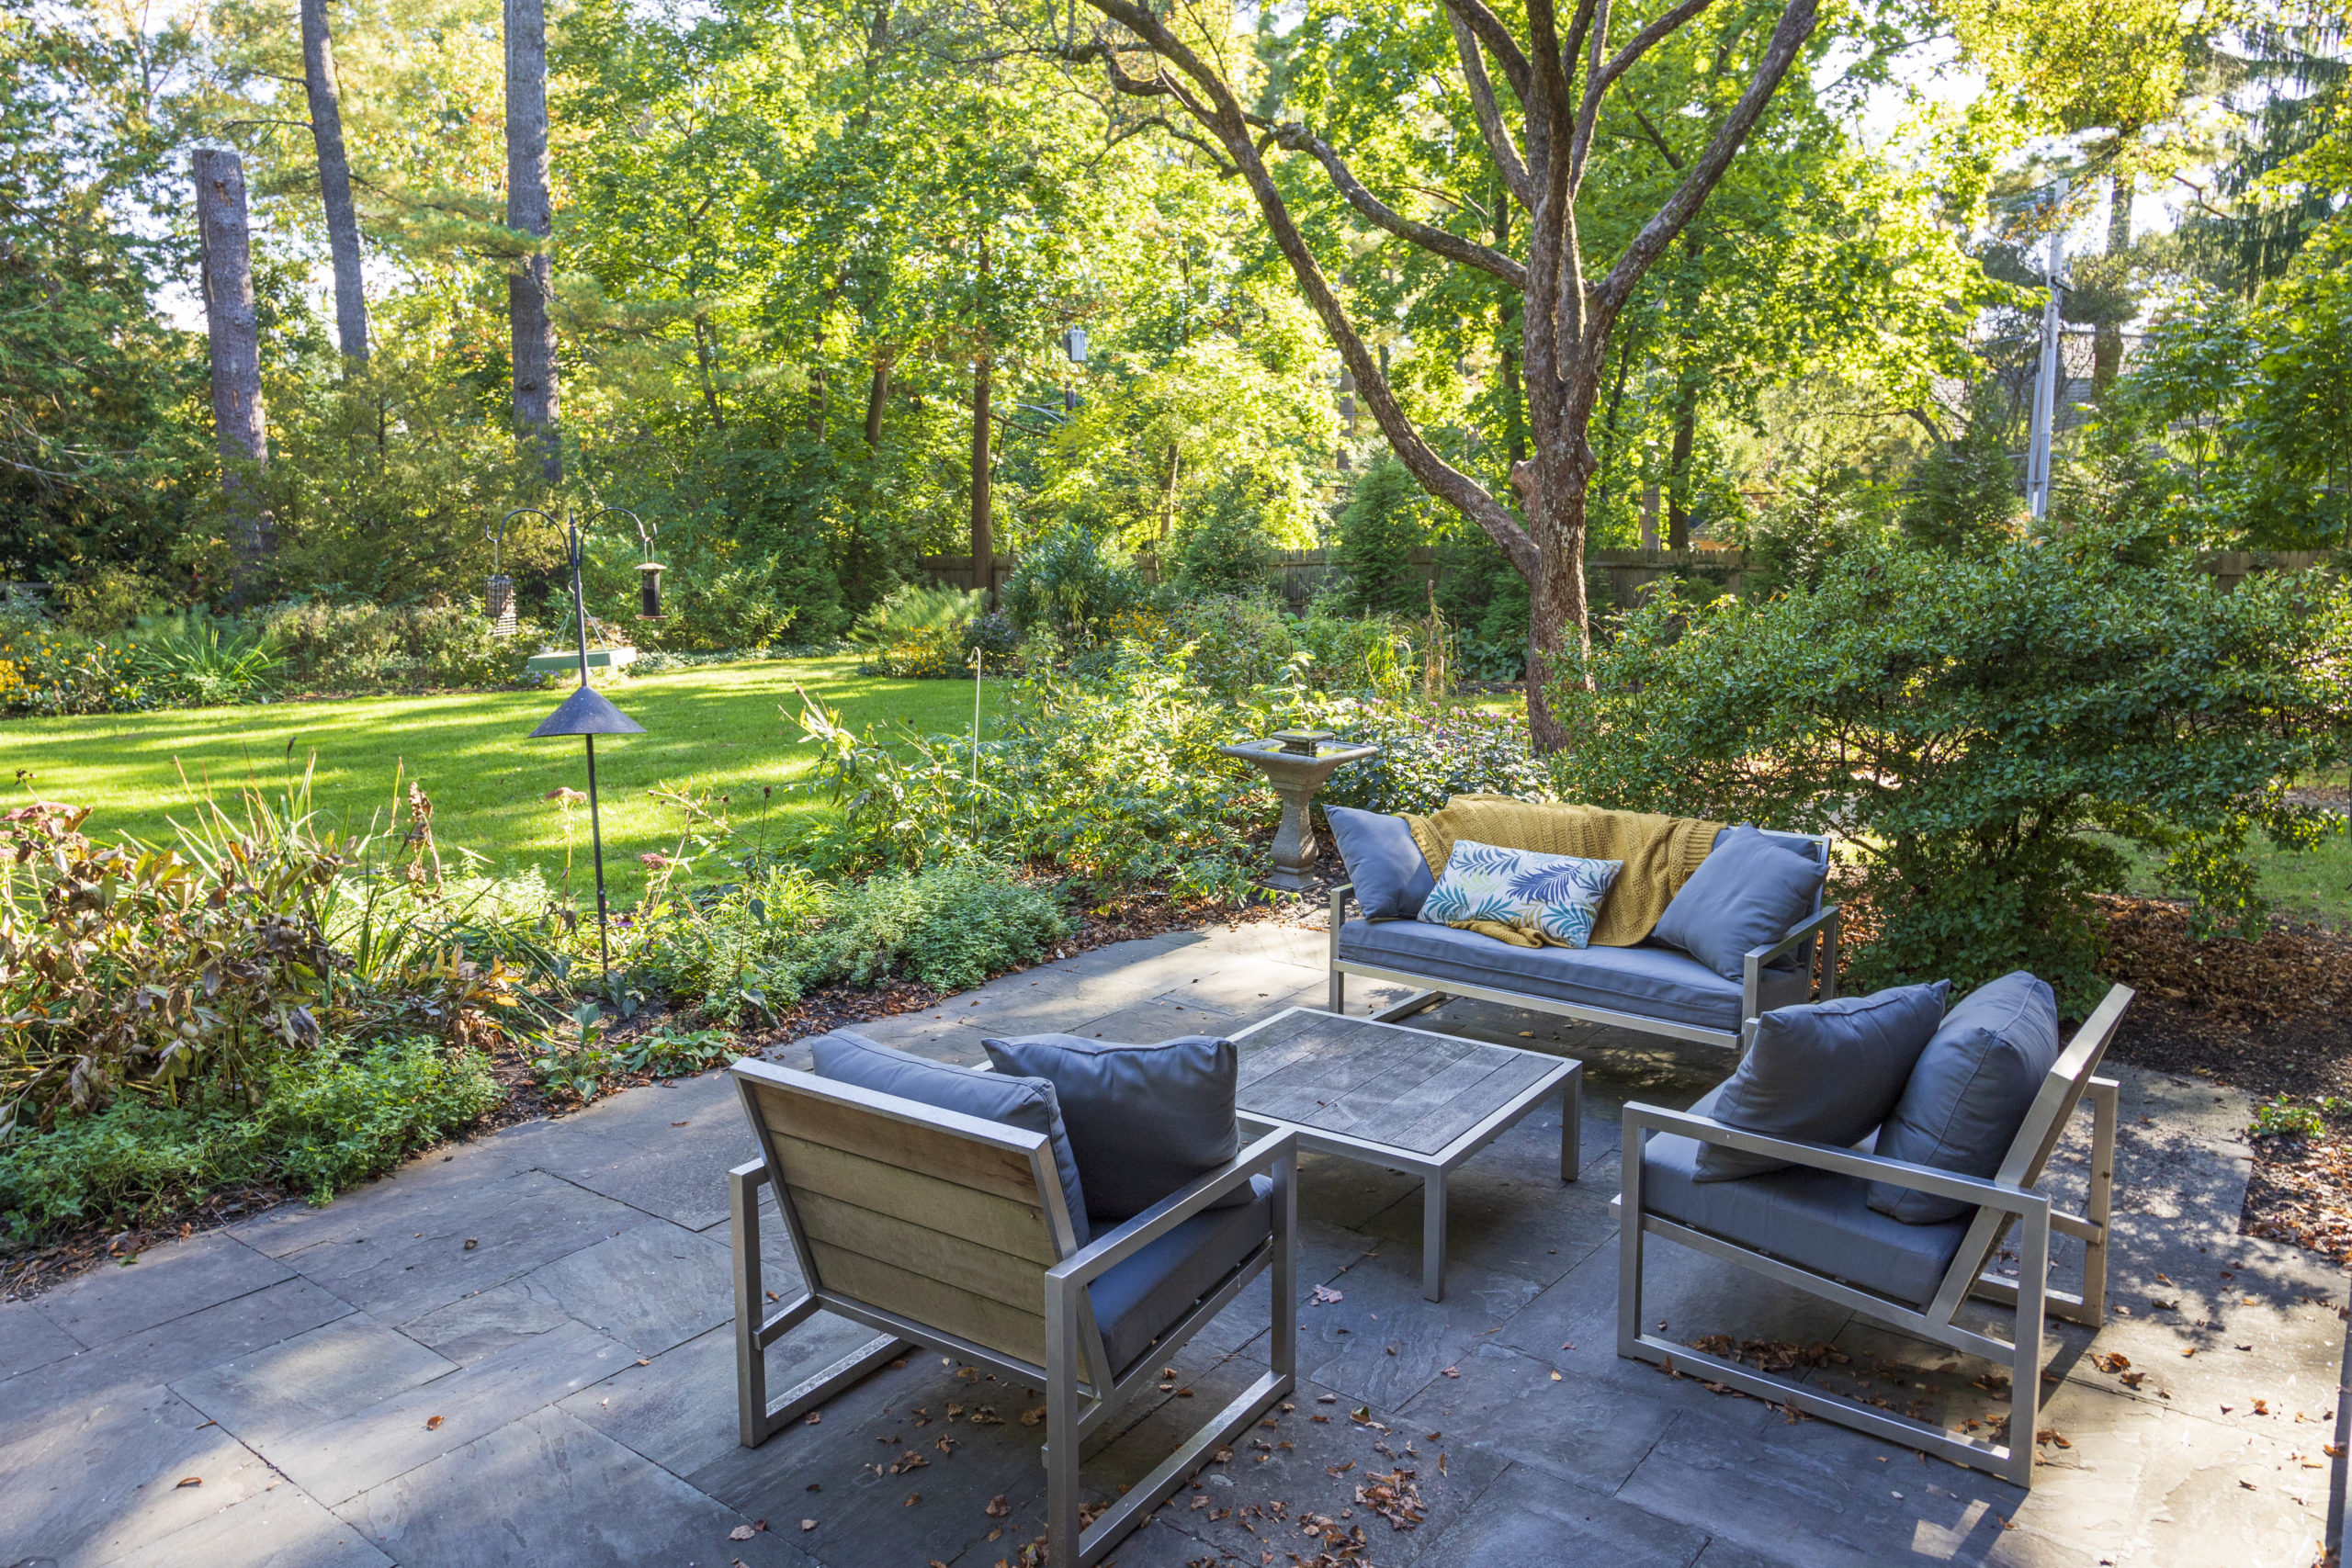 A relaxed seating area on a flagstone patio has views of a formal lawn and colorful, naturalistic garden beds.